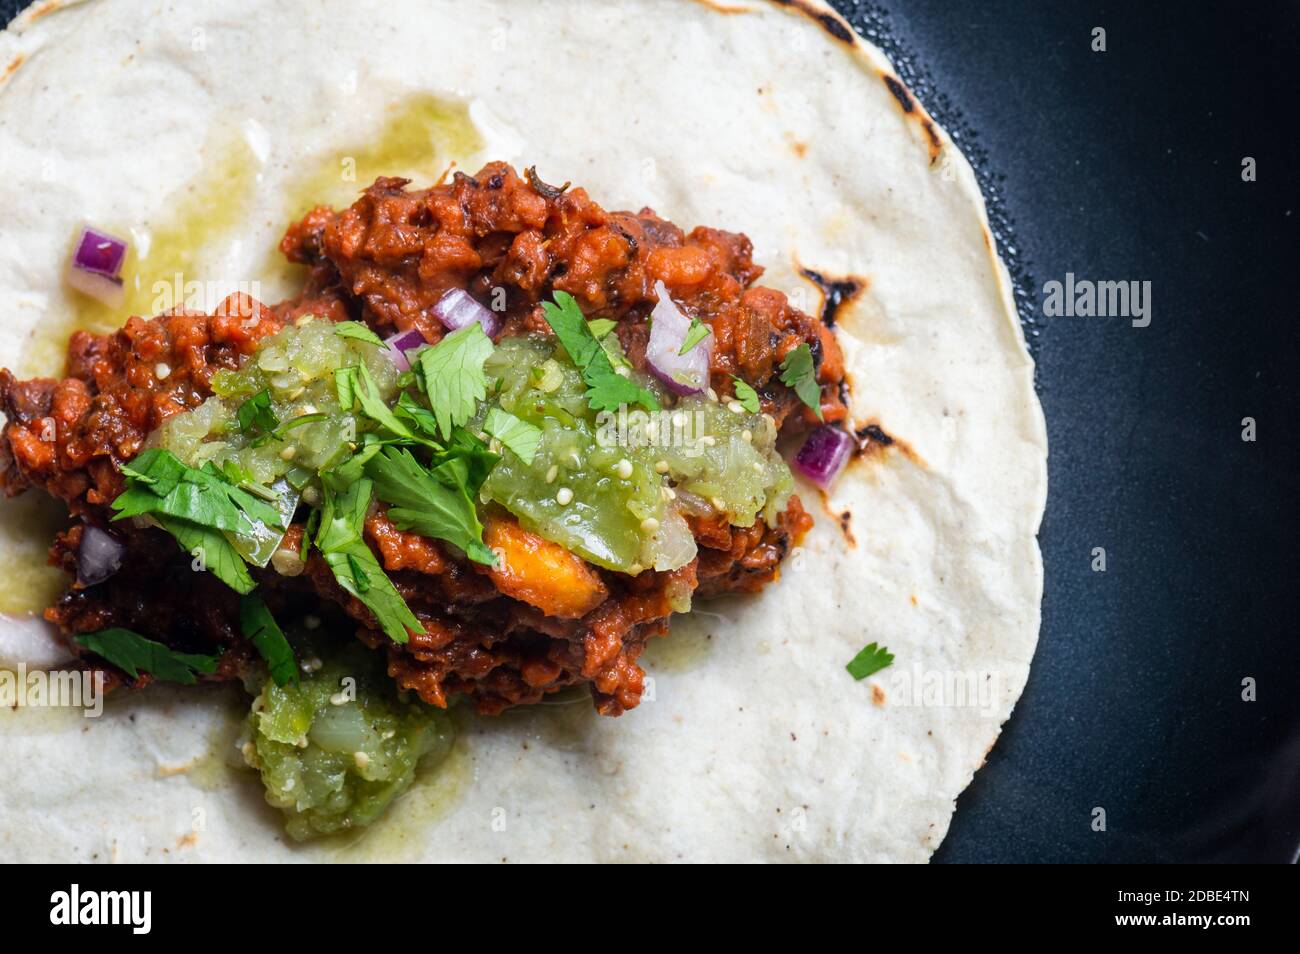 Vegetarian, vegan tacos al pastor with green salsa. Soya protein cooked with al pastor marinade and served on corn tortillas. Stock Photo